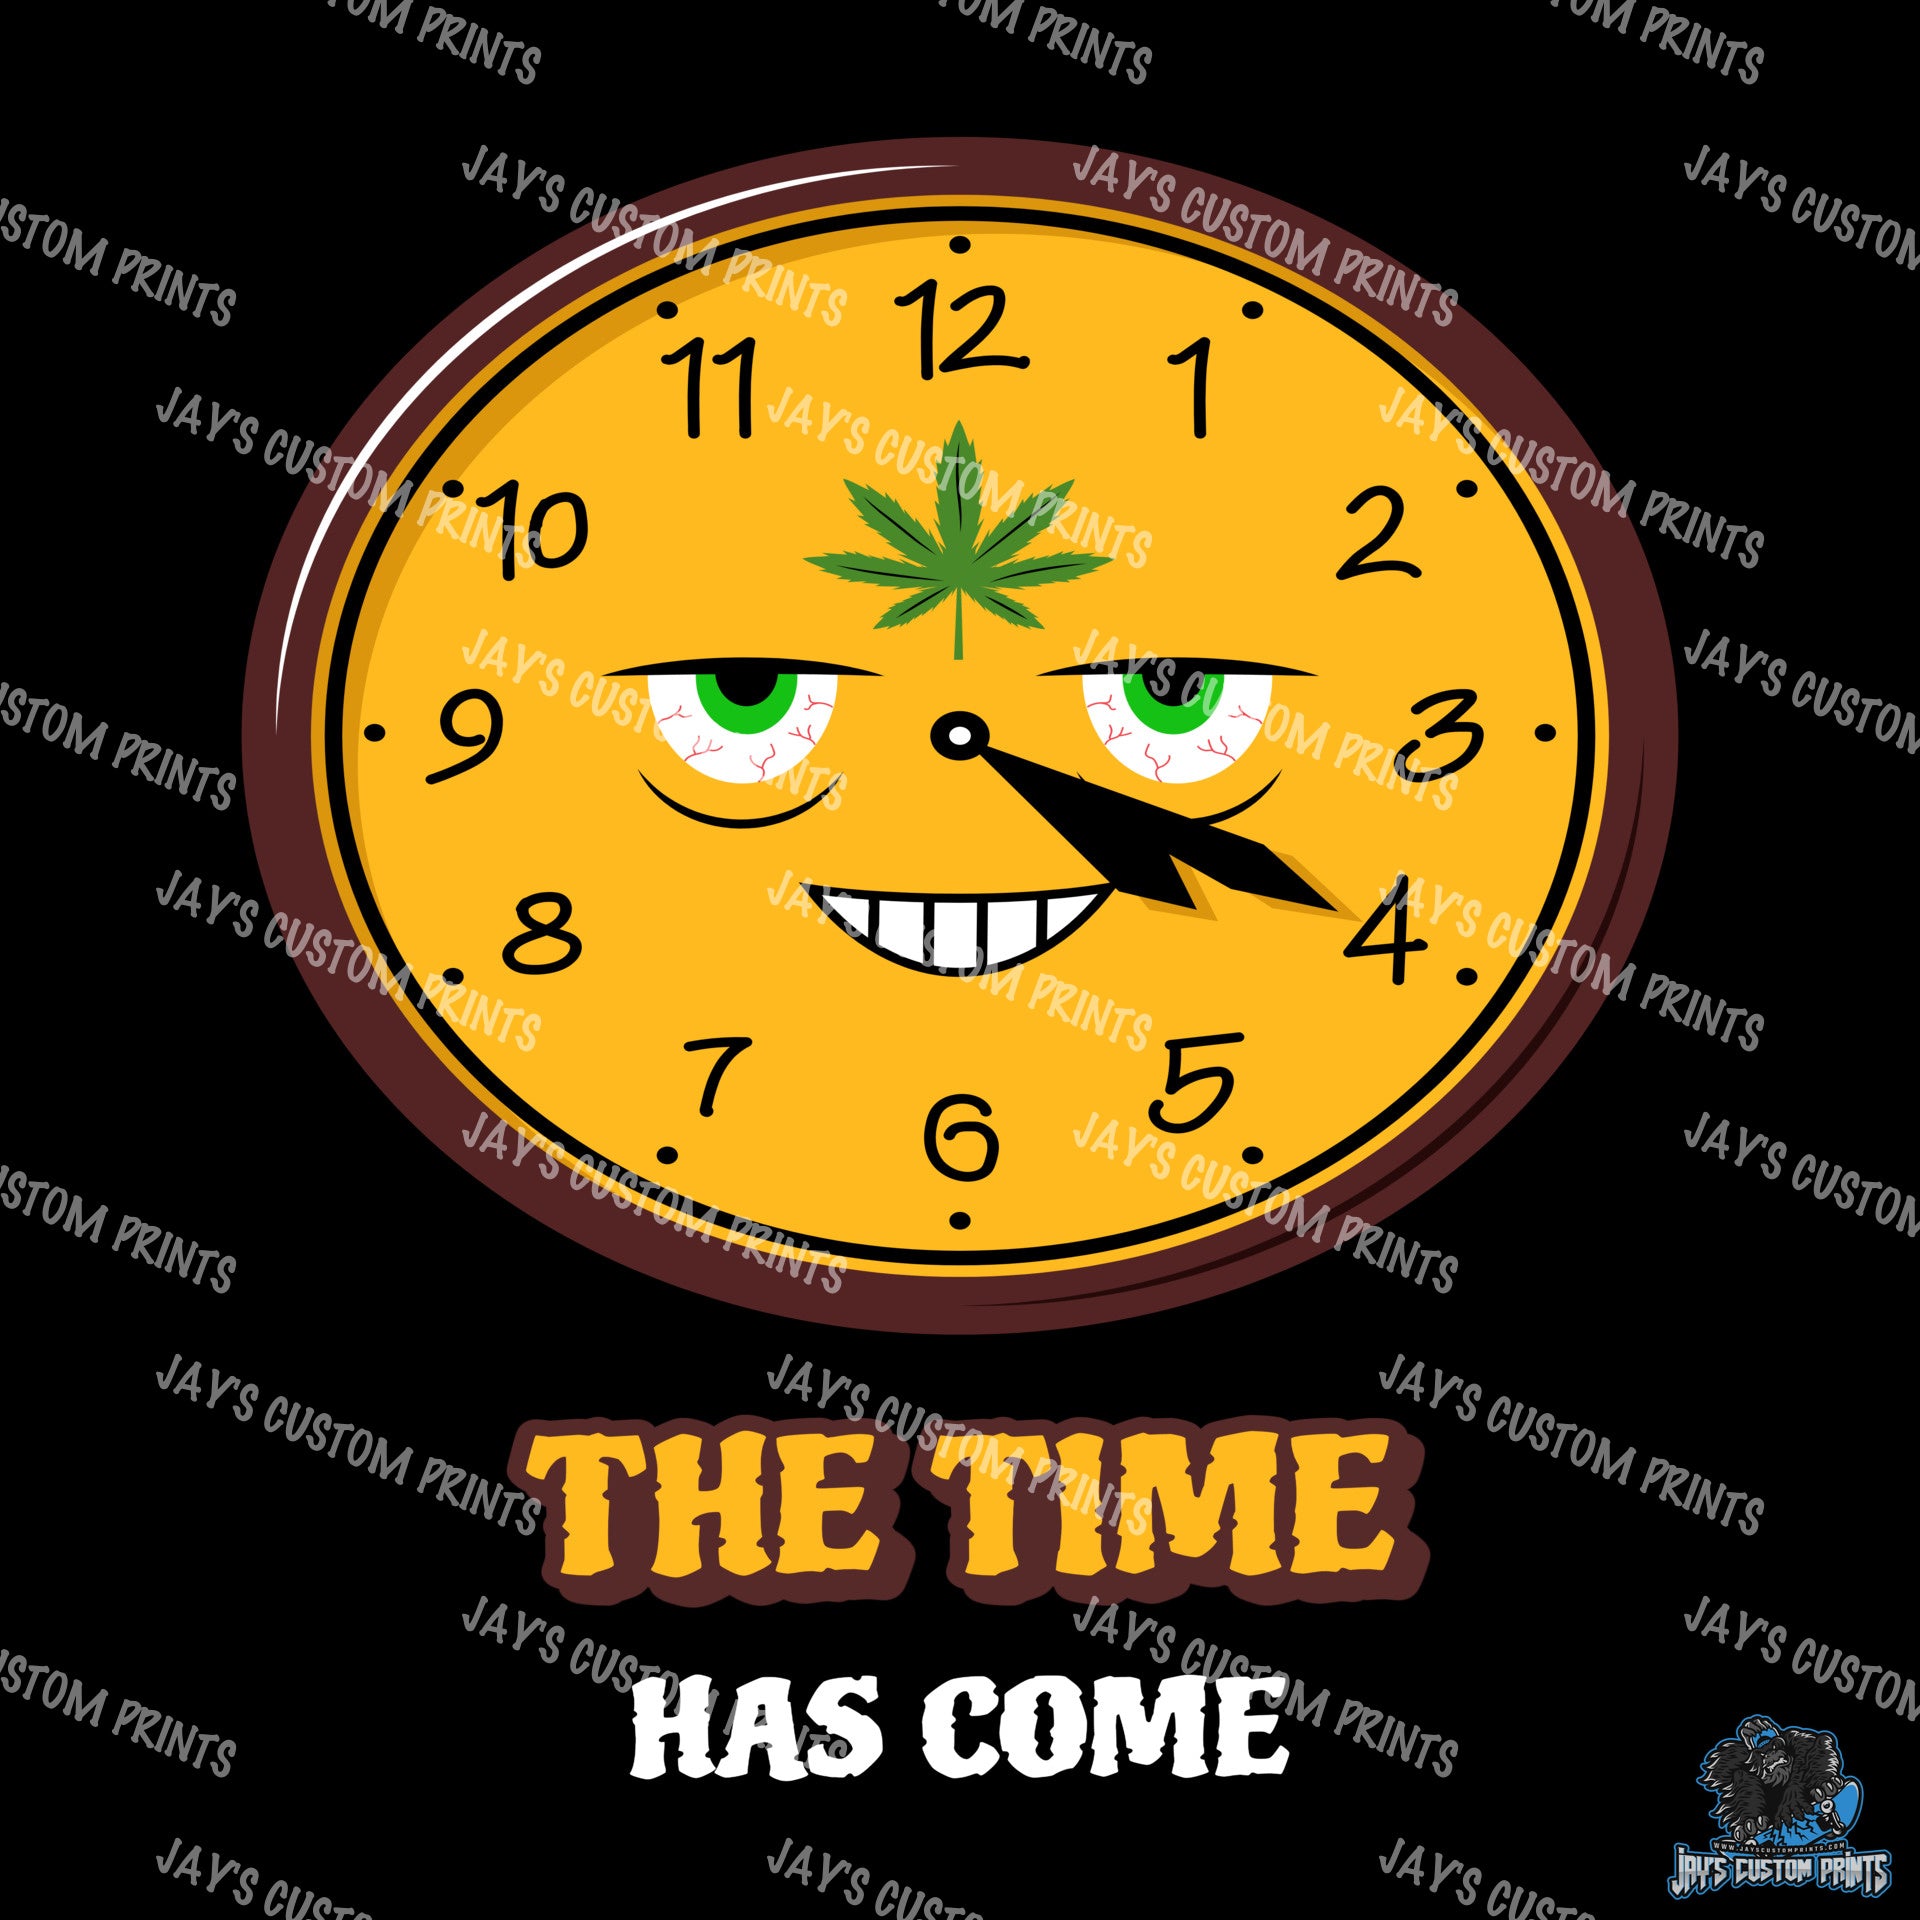 4:20 - The Time Has Come